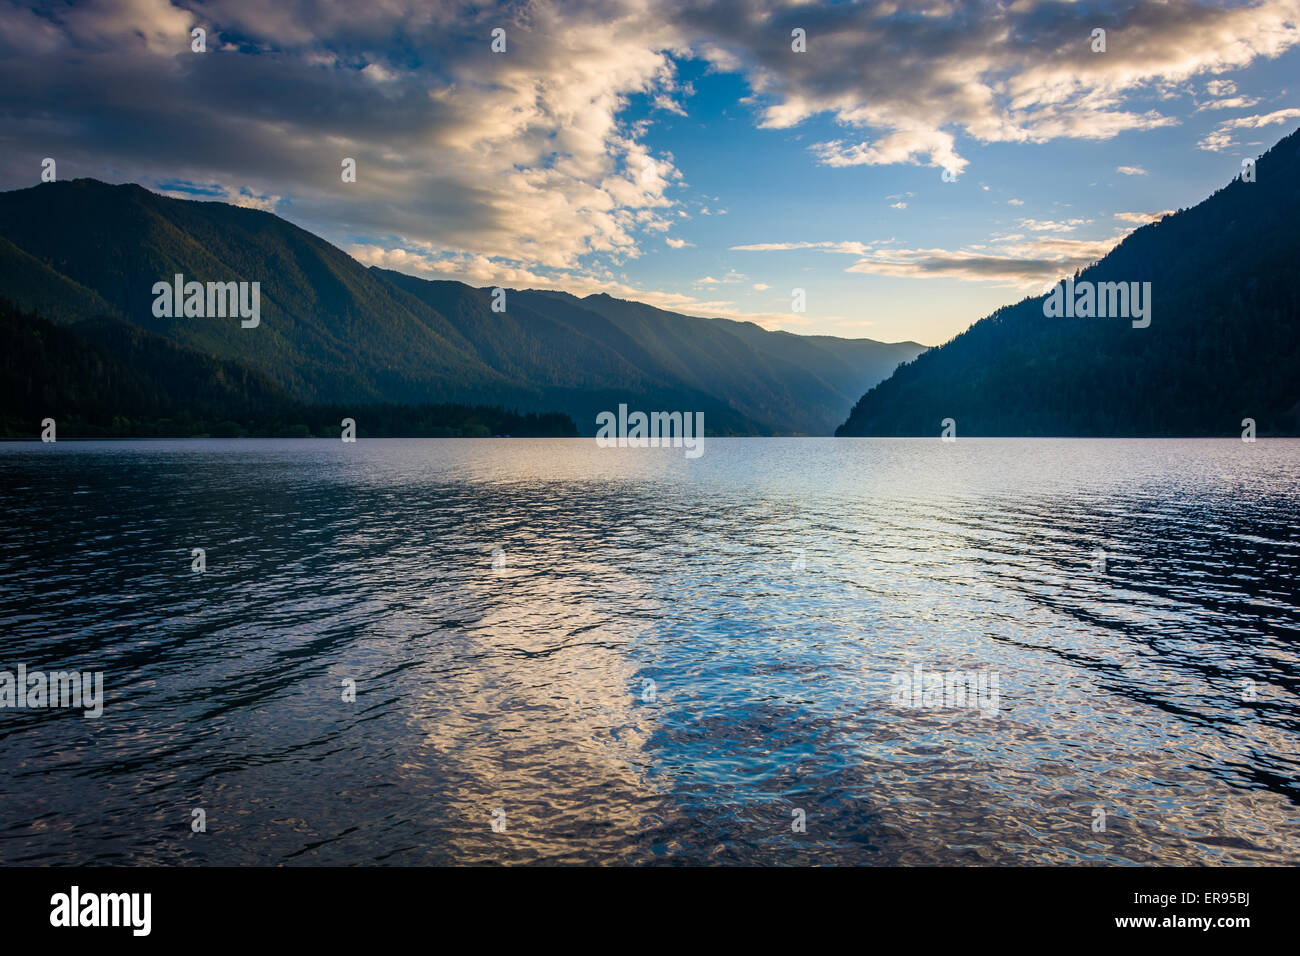 Evening light on Lake Crescent and mountains in Olympic National Park, Washington. Stock Photo